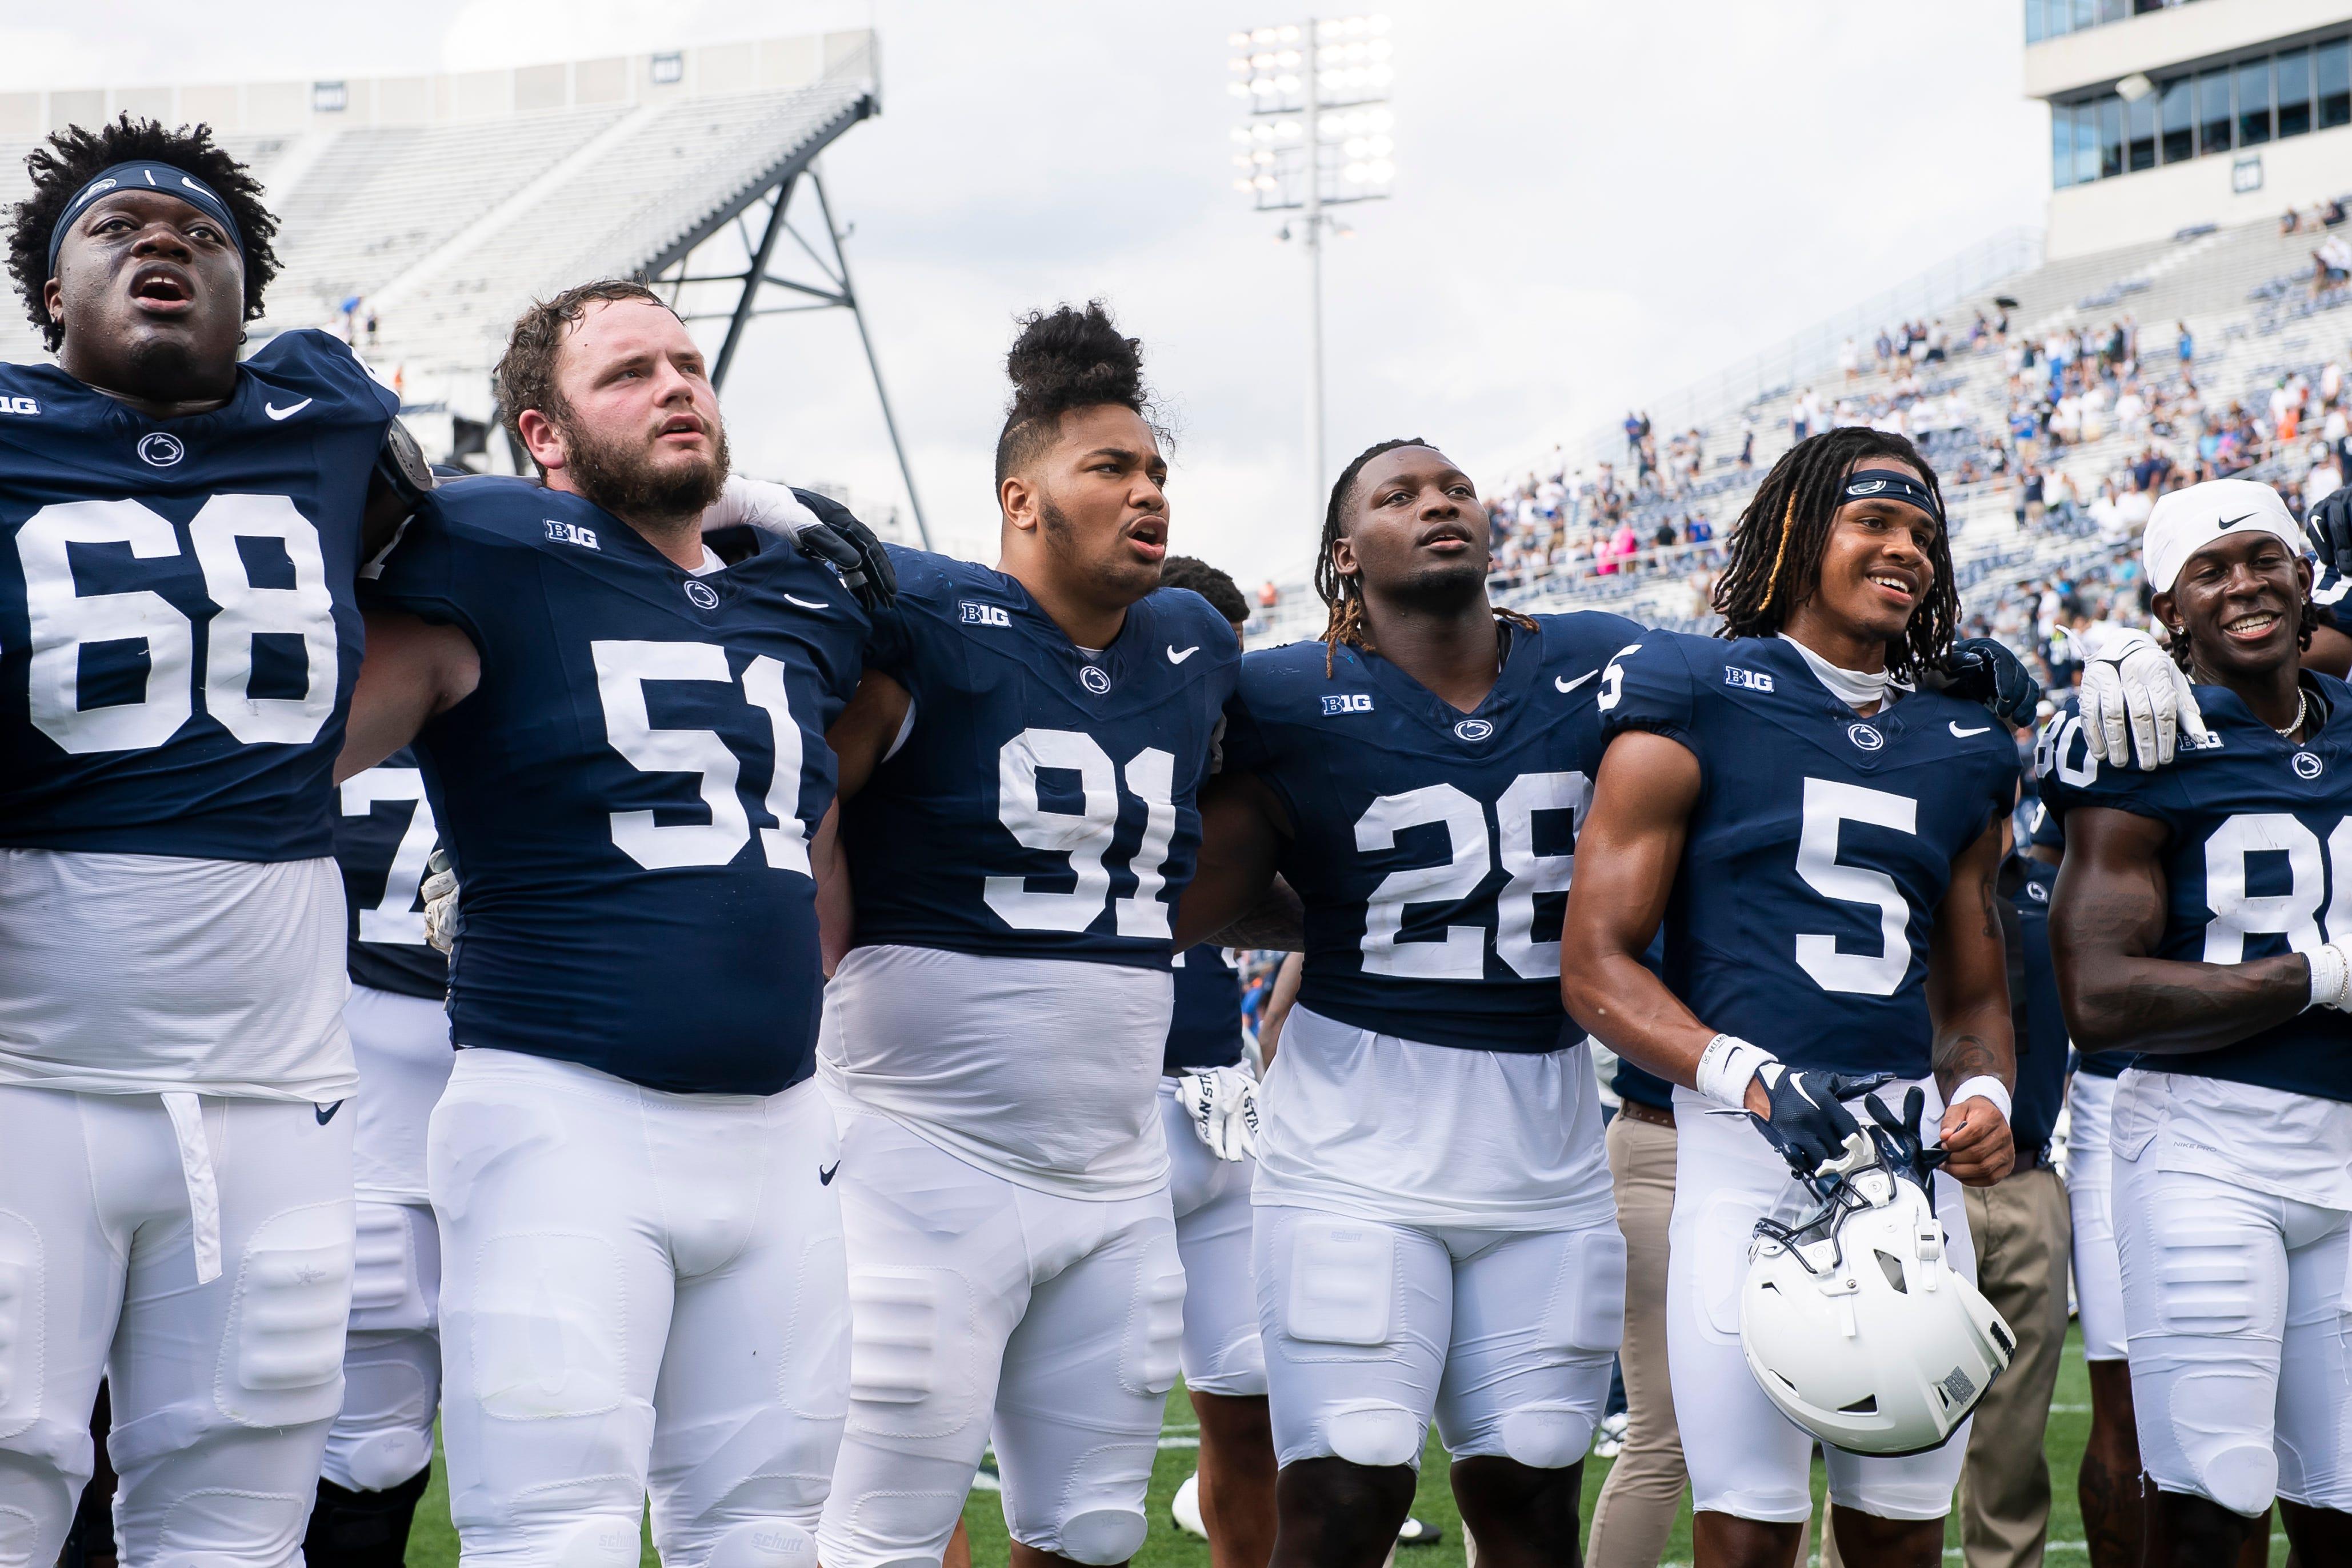 Penn State players singing the alma mater